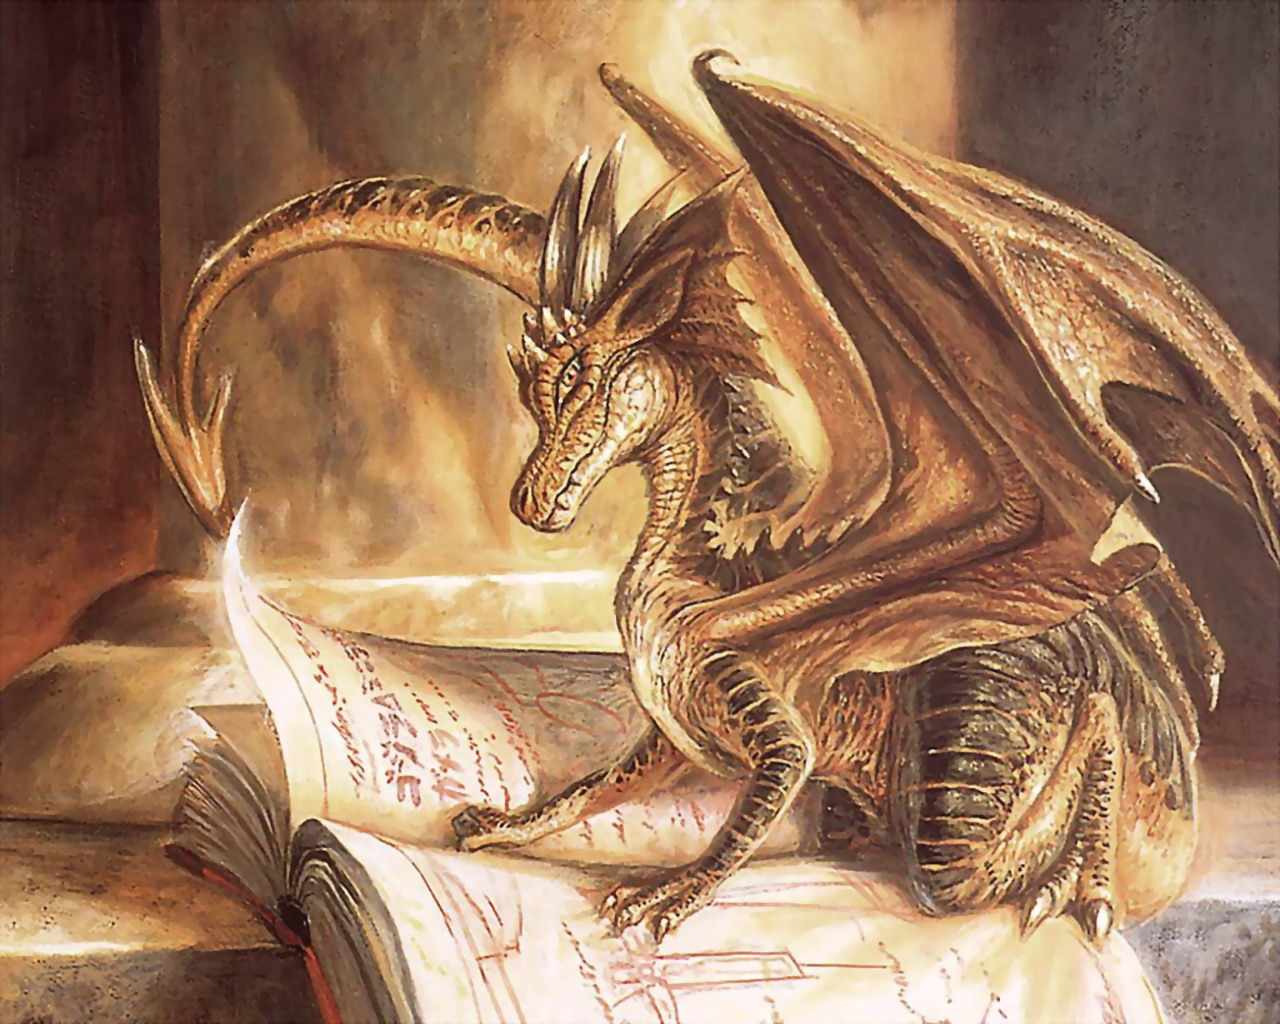 http://all-things-andy-gavin.com/wp-content/uploads/2012/09/Golden-Dragon-Reading-Book.jpg